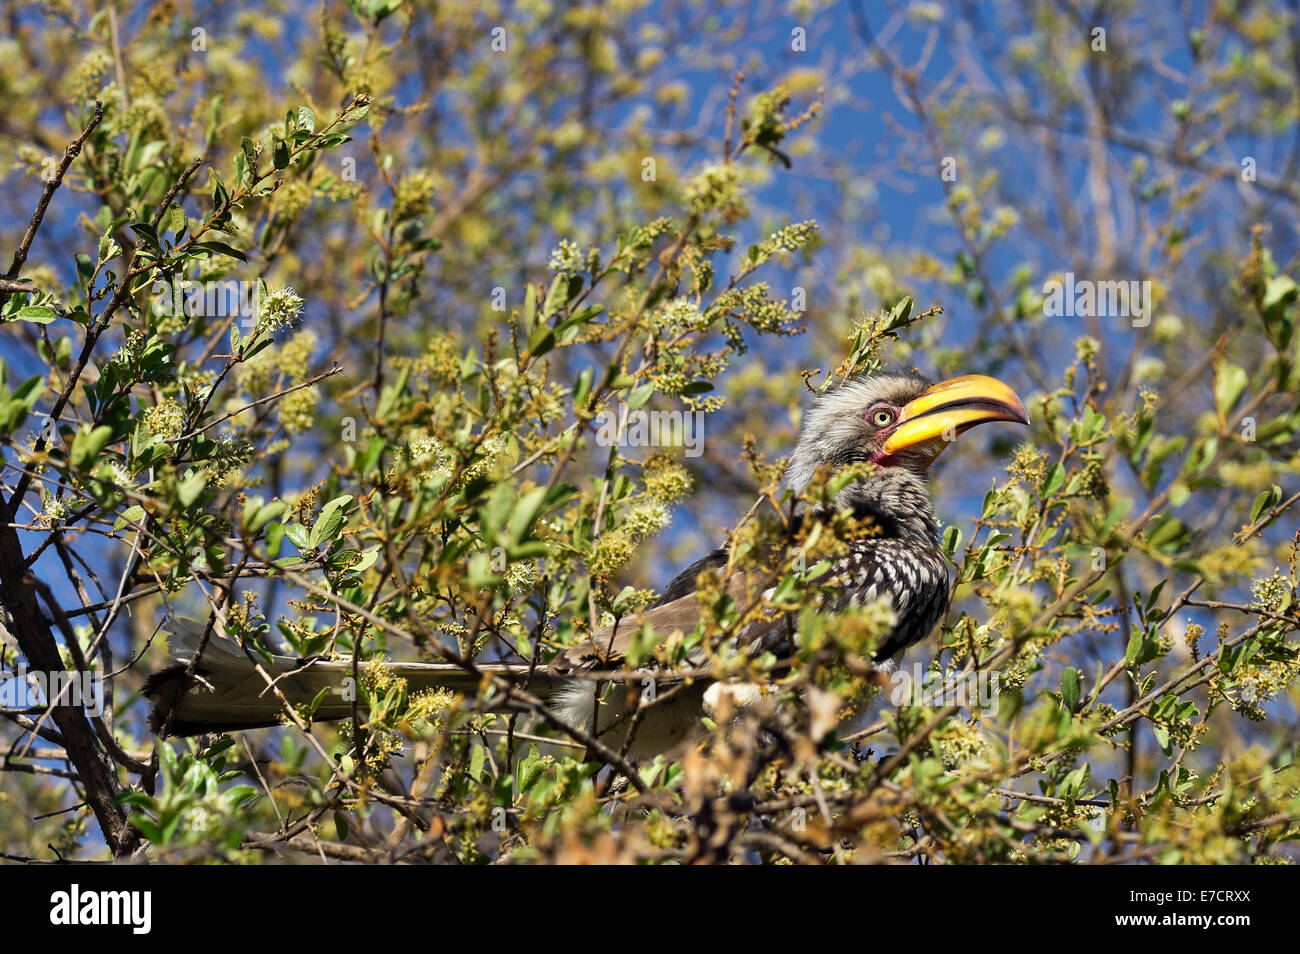 South Africa, Southern Yellow-billed Horn-bill, Tockus leucomelas Stock Photo